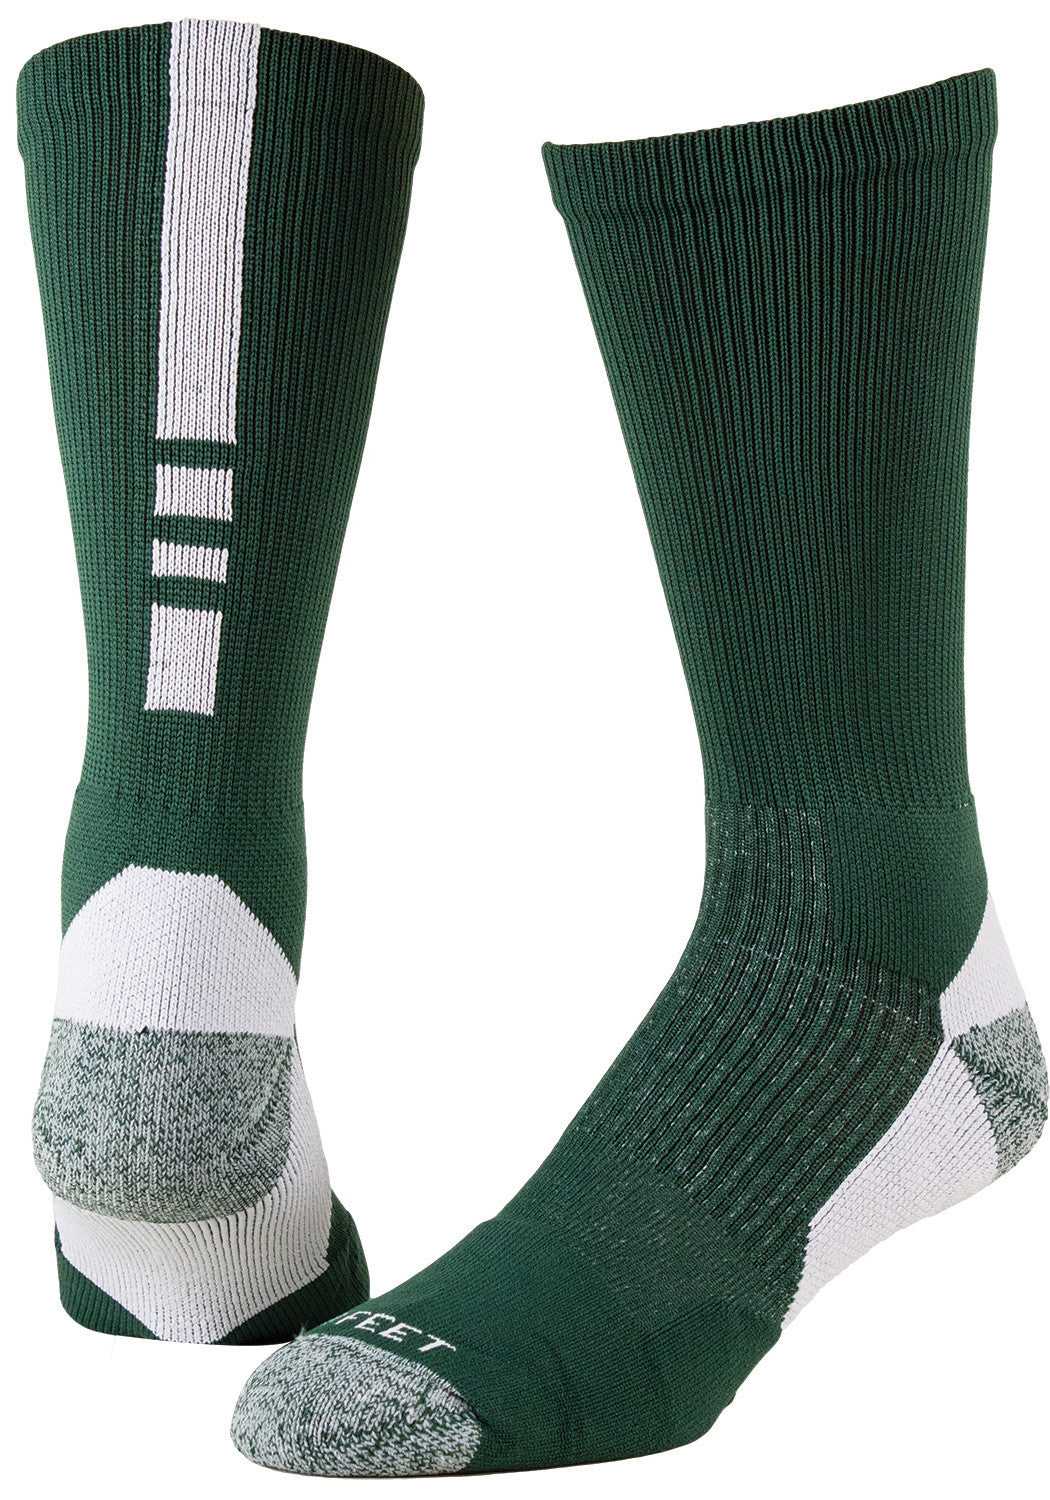 Pro Feet 238 Pro Feet Performance Shooter 2.0 Crew Socks - Forest White - HIT a Double